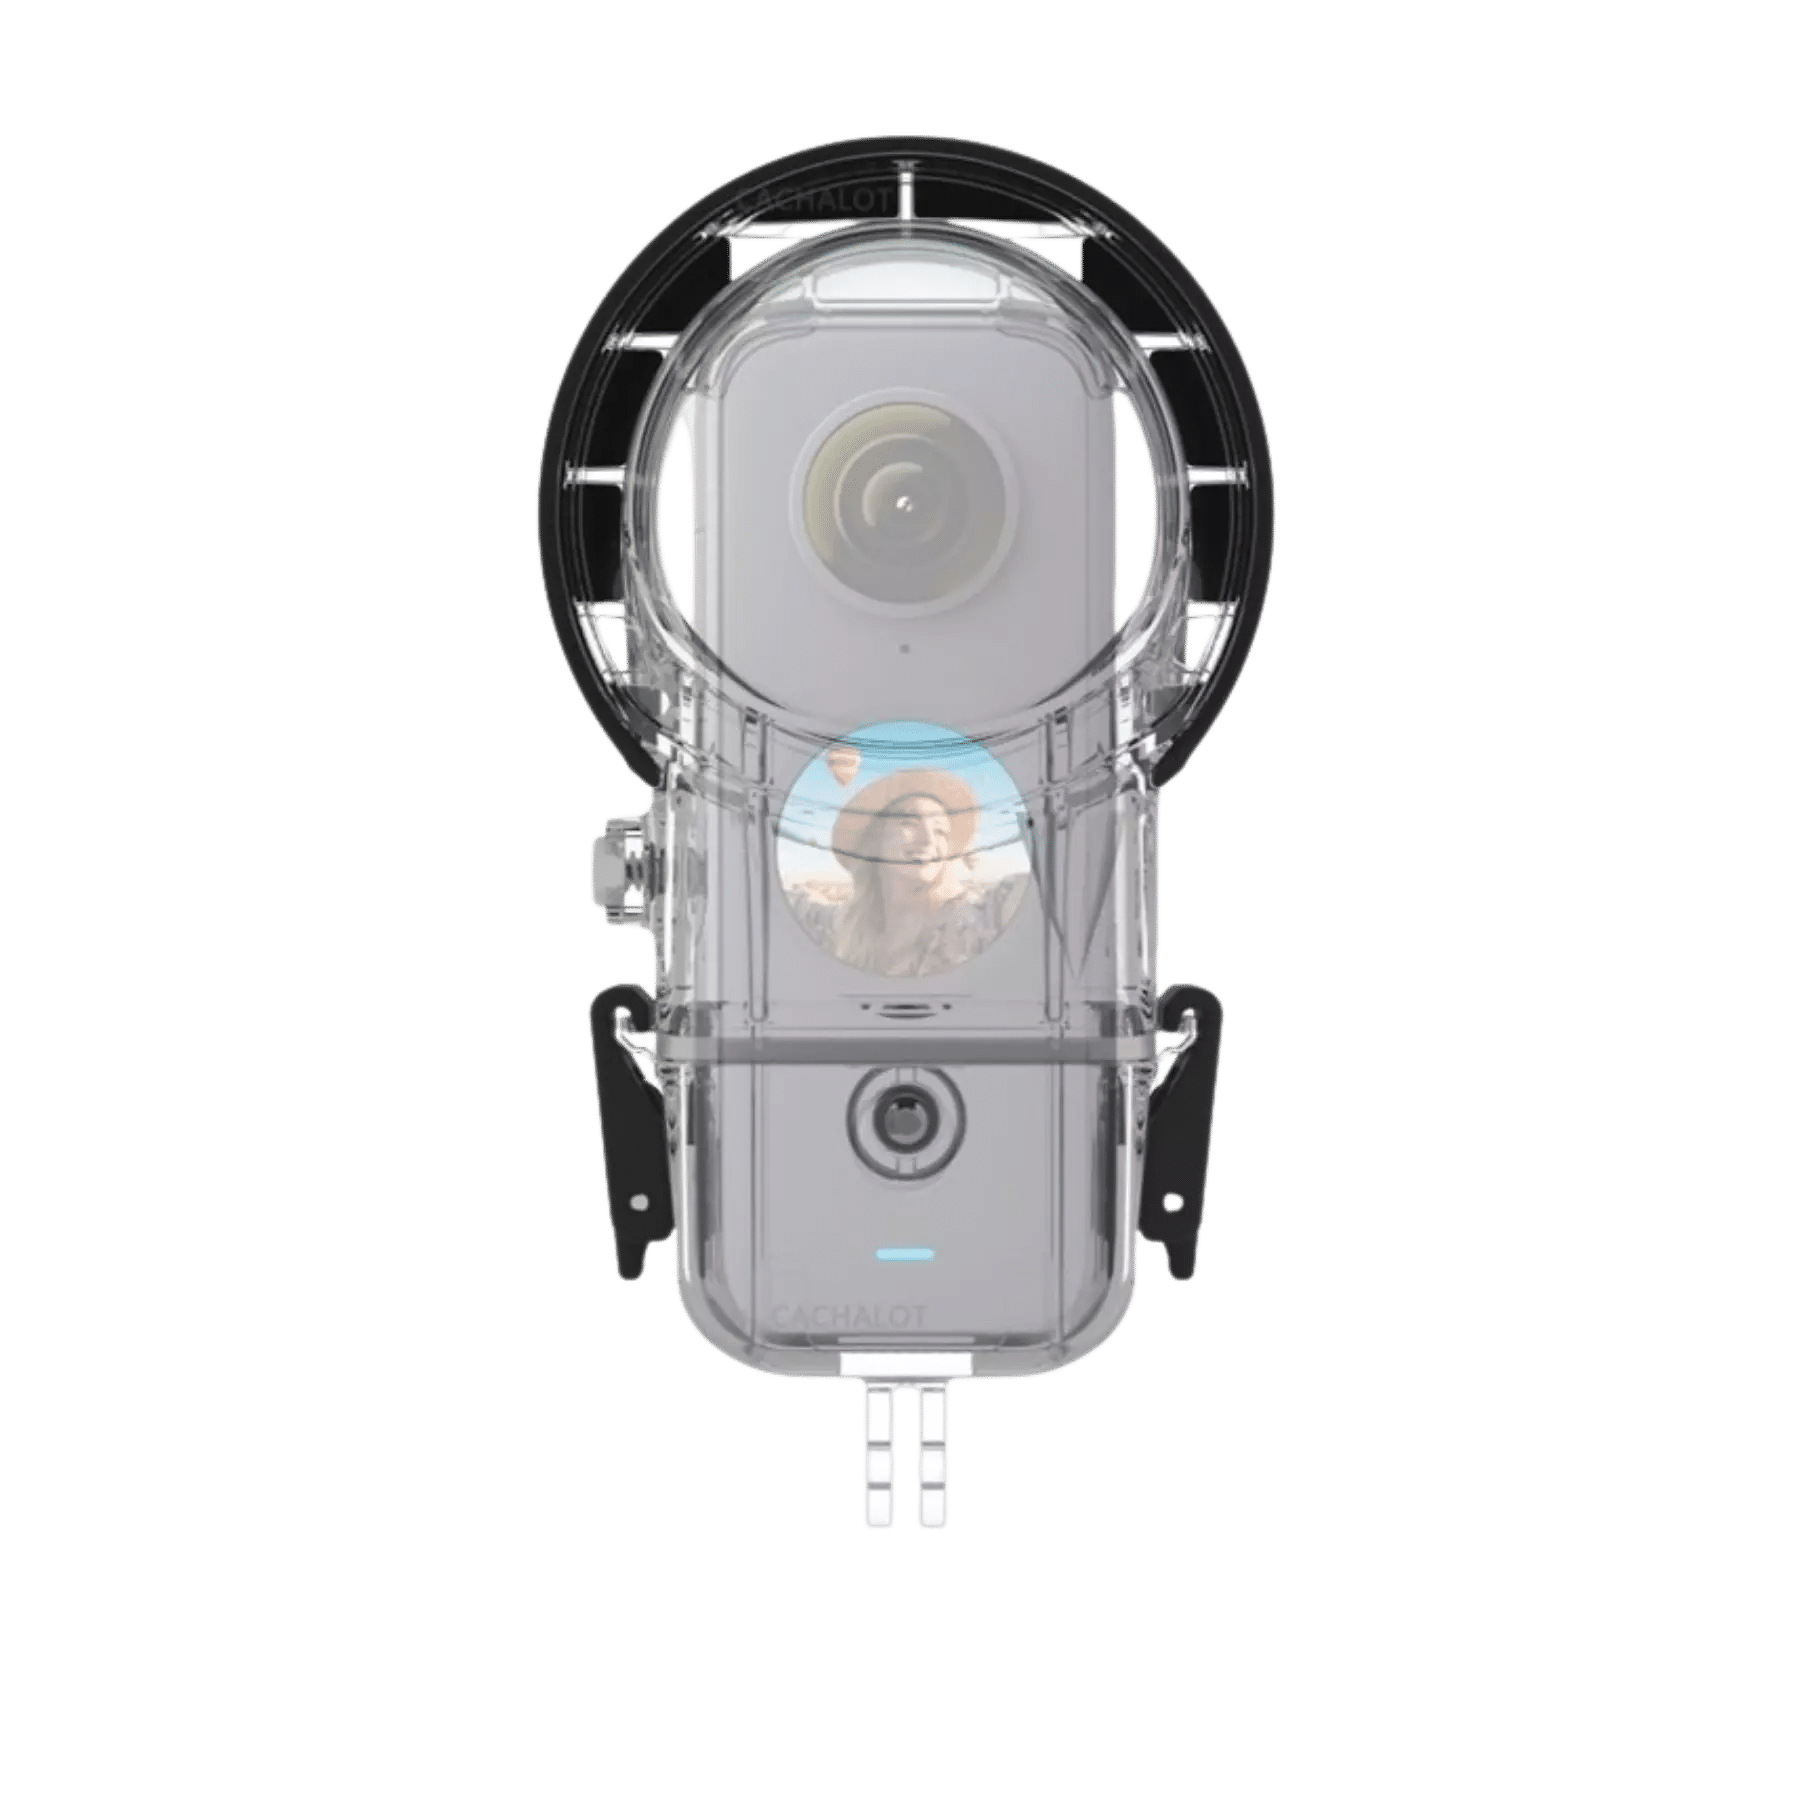 These are product images of Insta360 X2 Scuba Suit by SharePal in Bangalore.